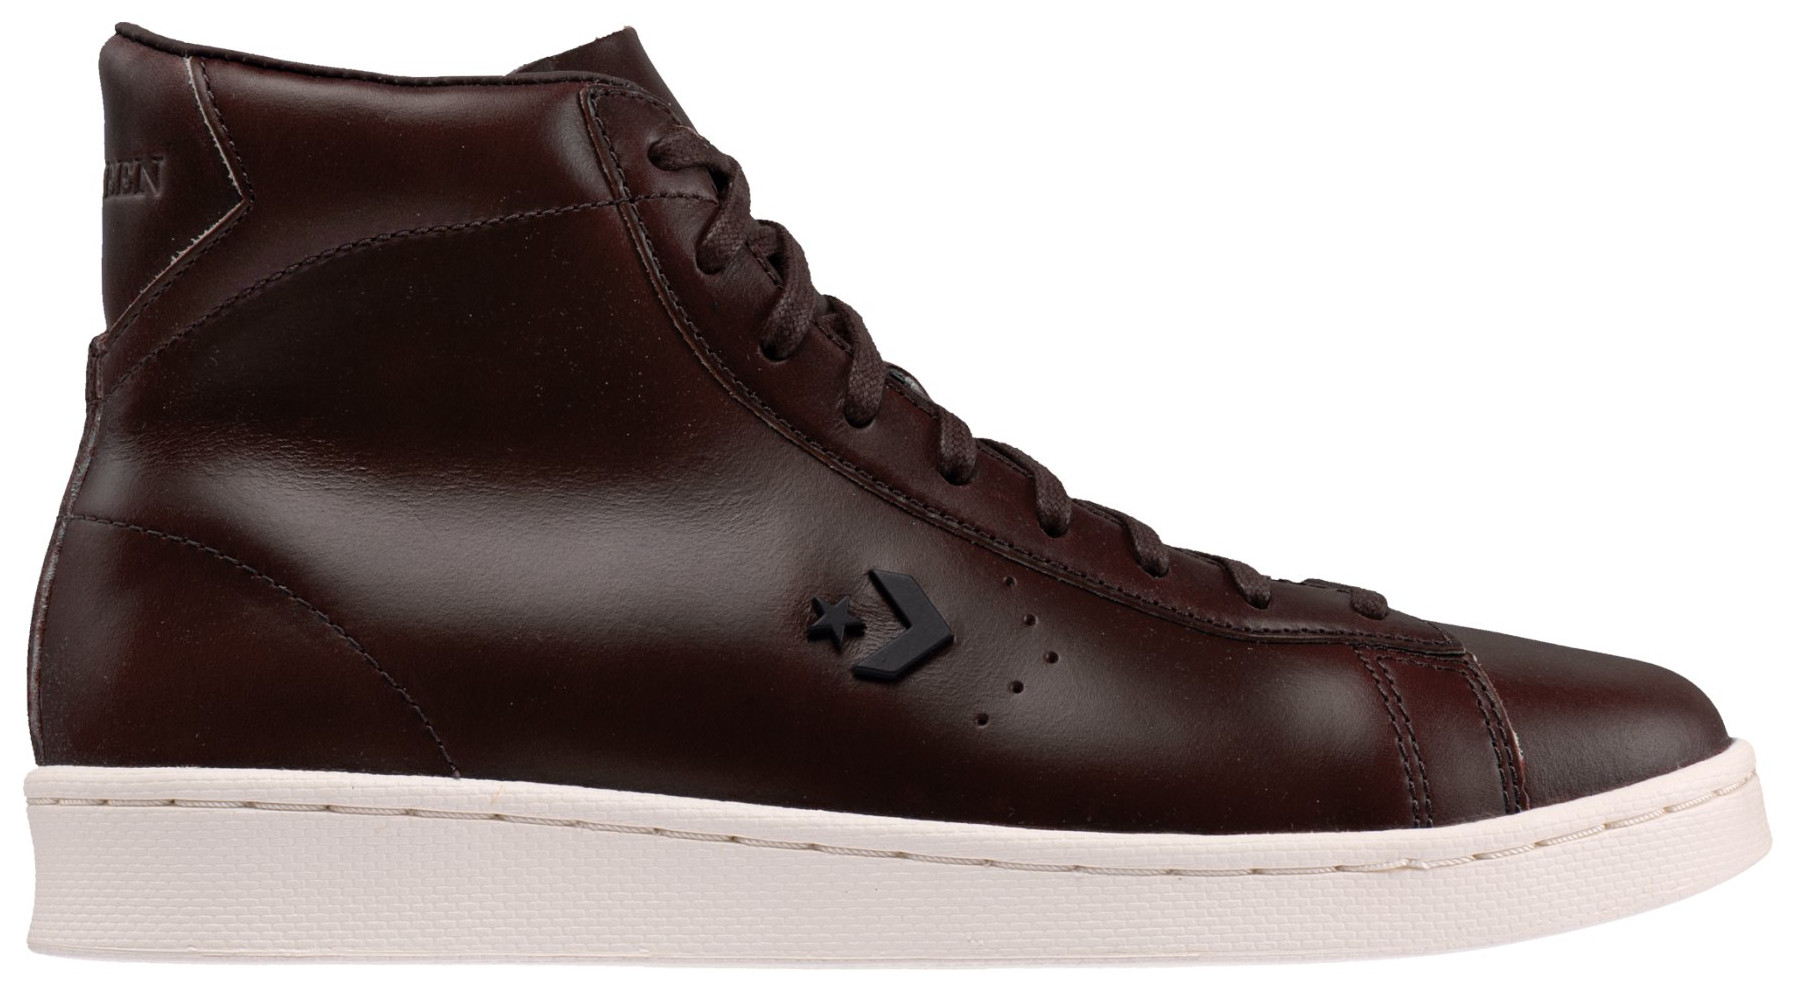 Converse X Horween Pro Leather